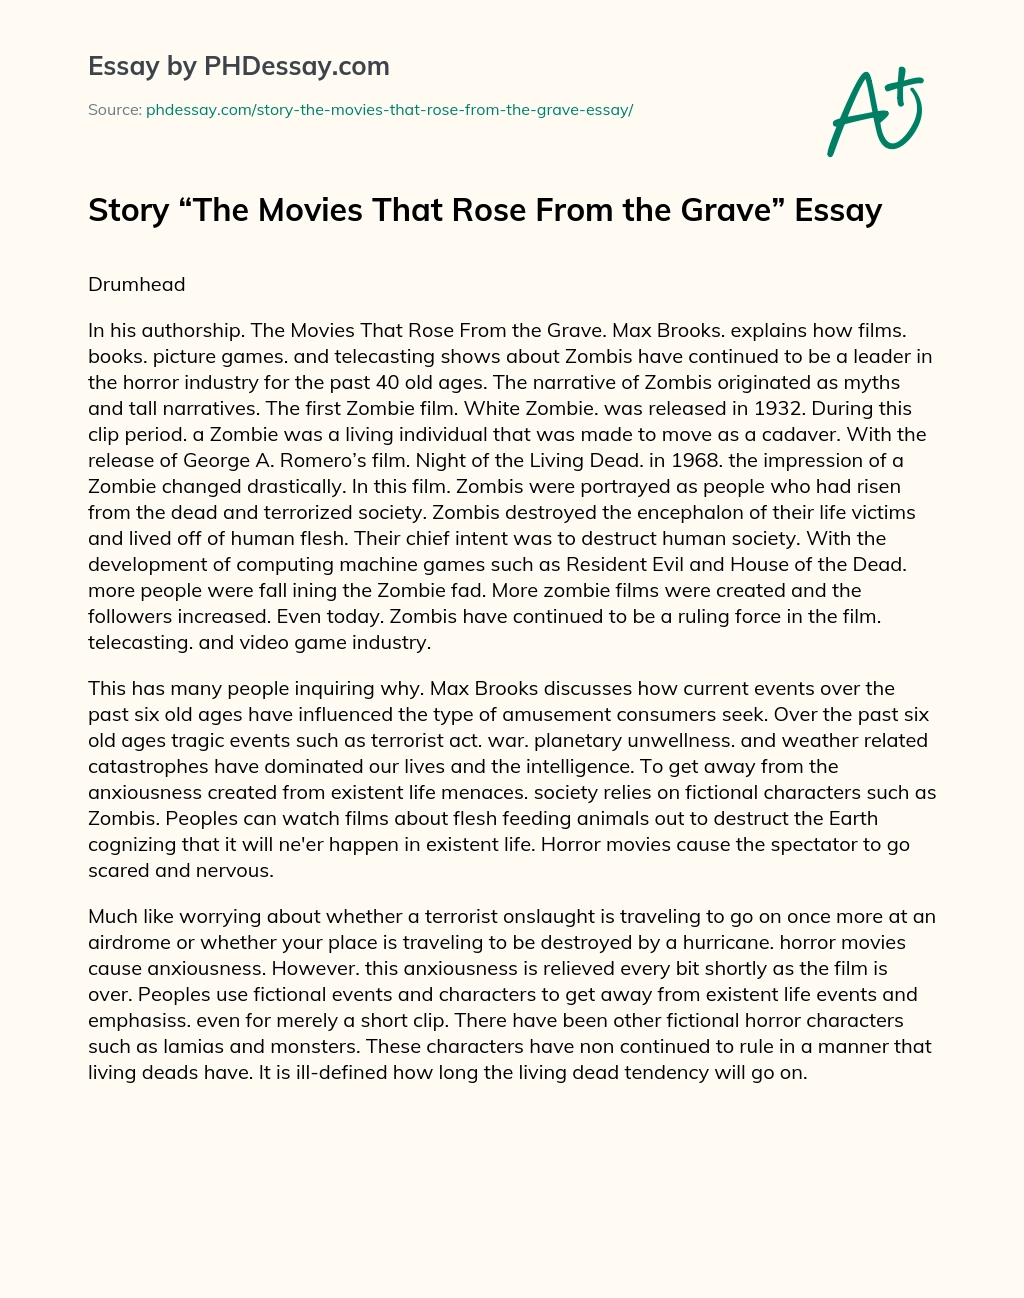 Story “The Movies That Rose From the Grave” Essay essay